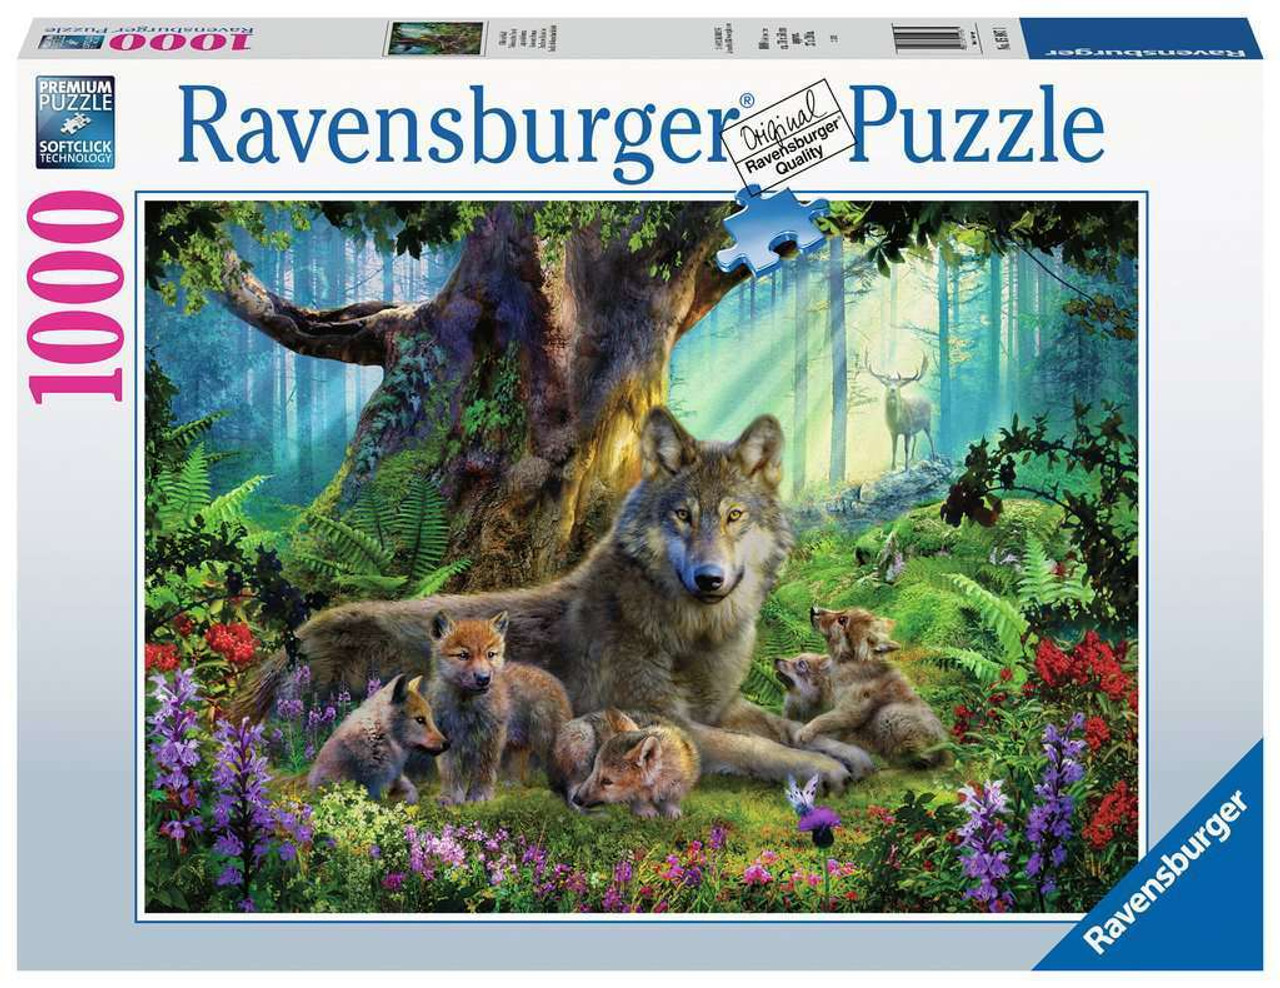 Ravensburger Puzzle - 1500 Pieces - Wolves In Spring